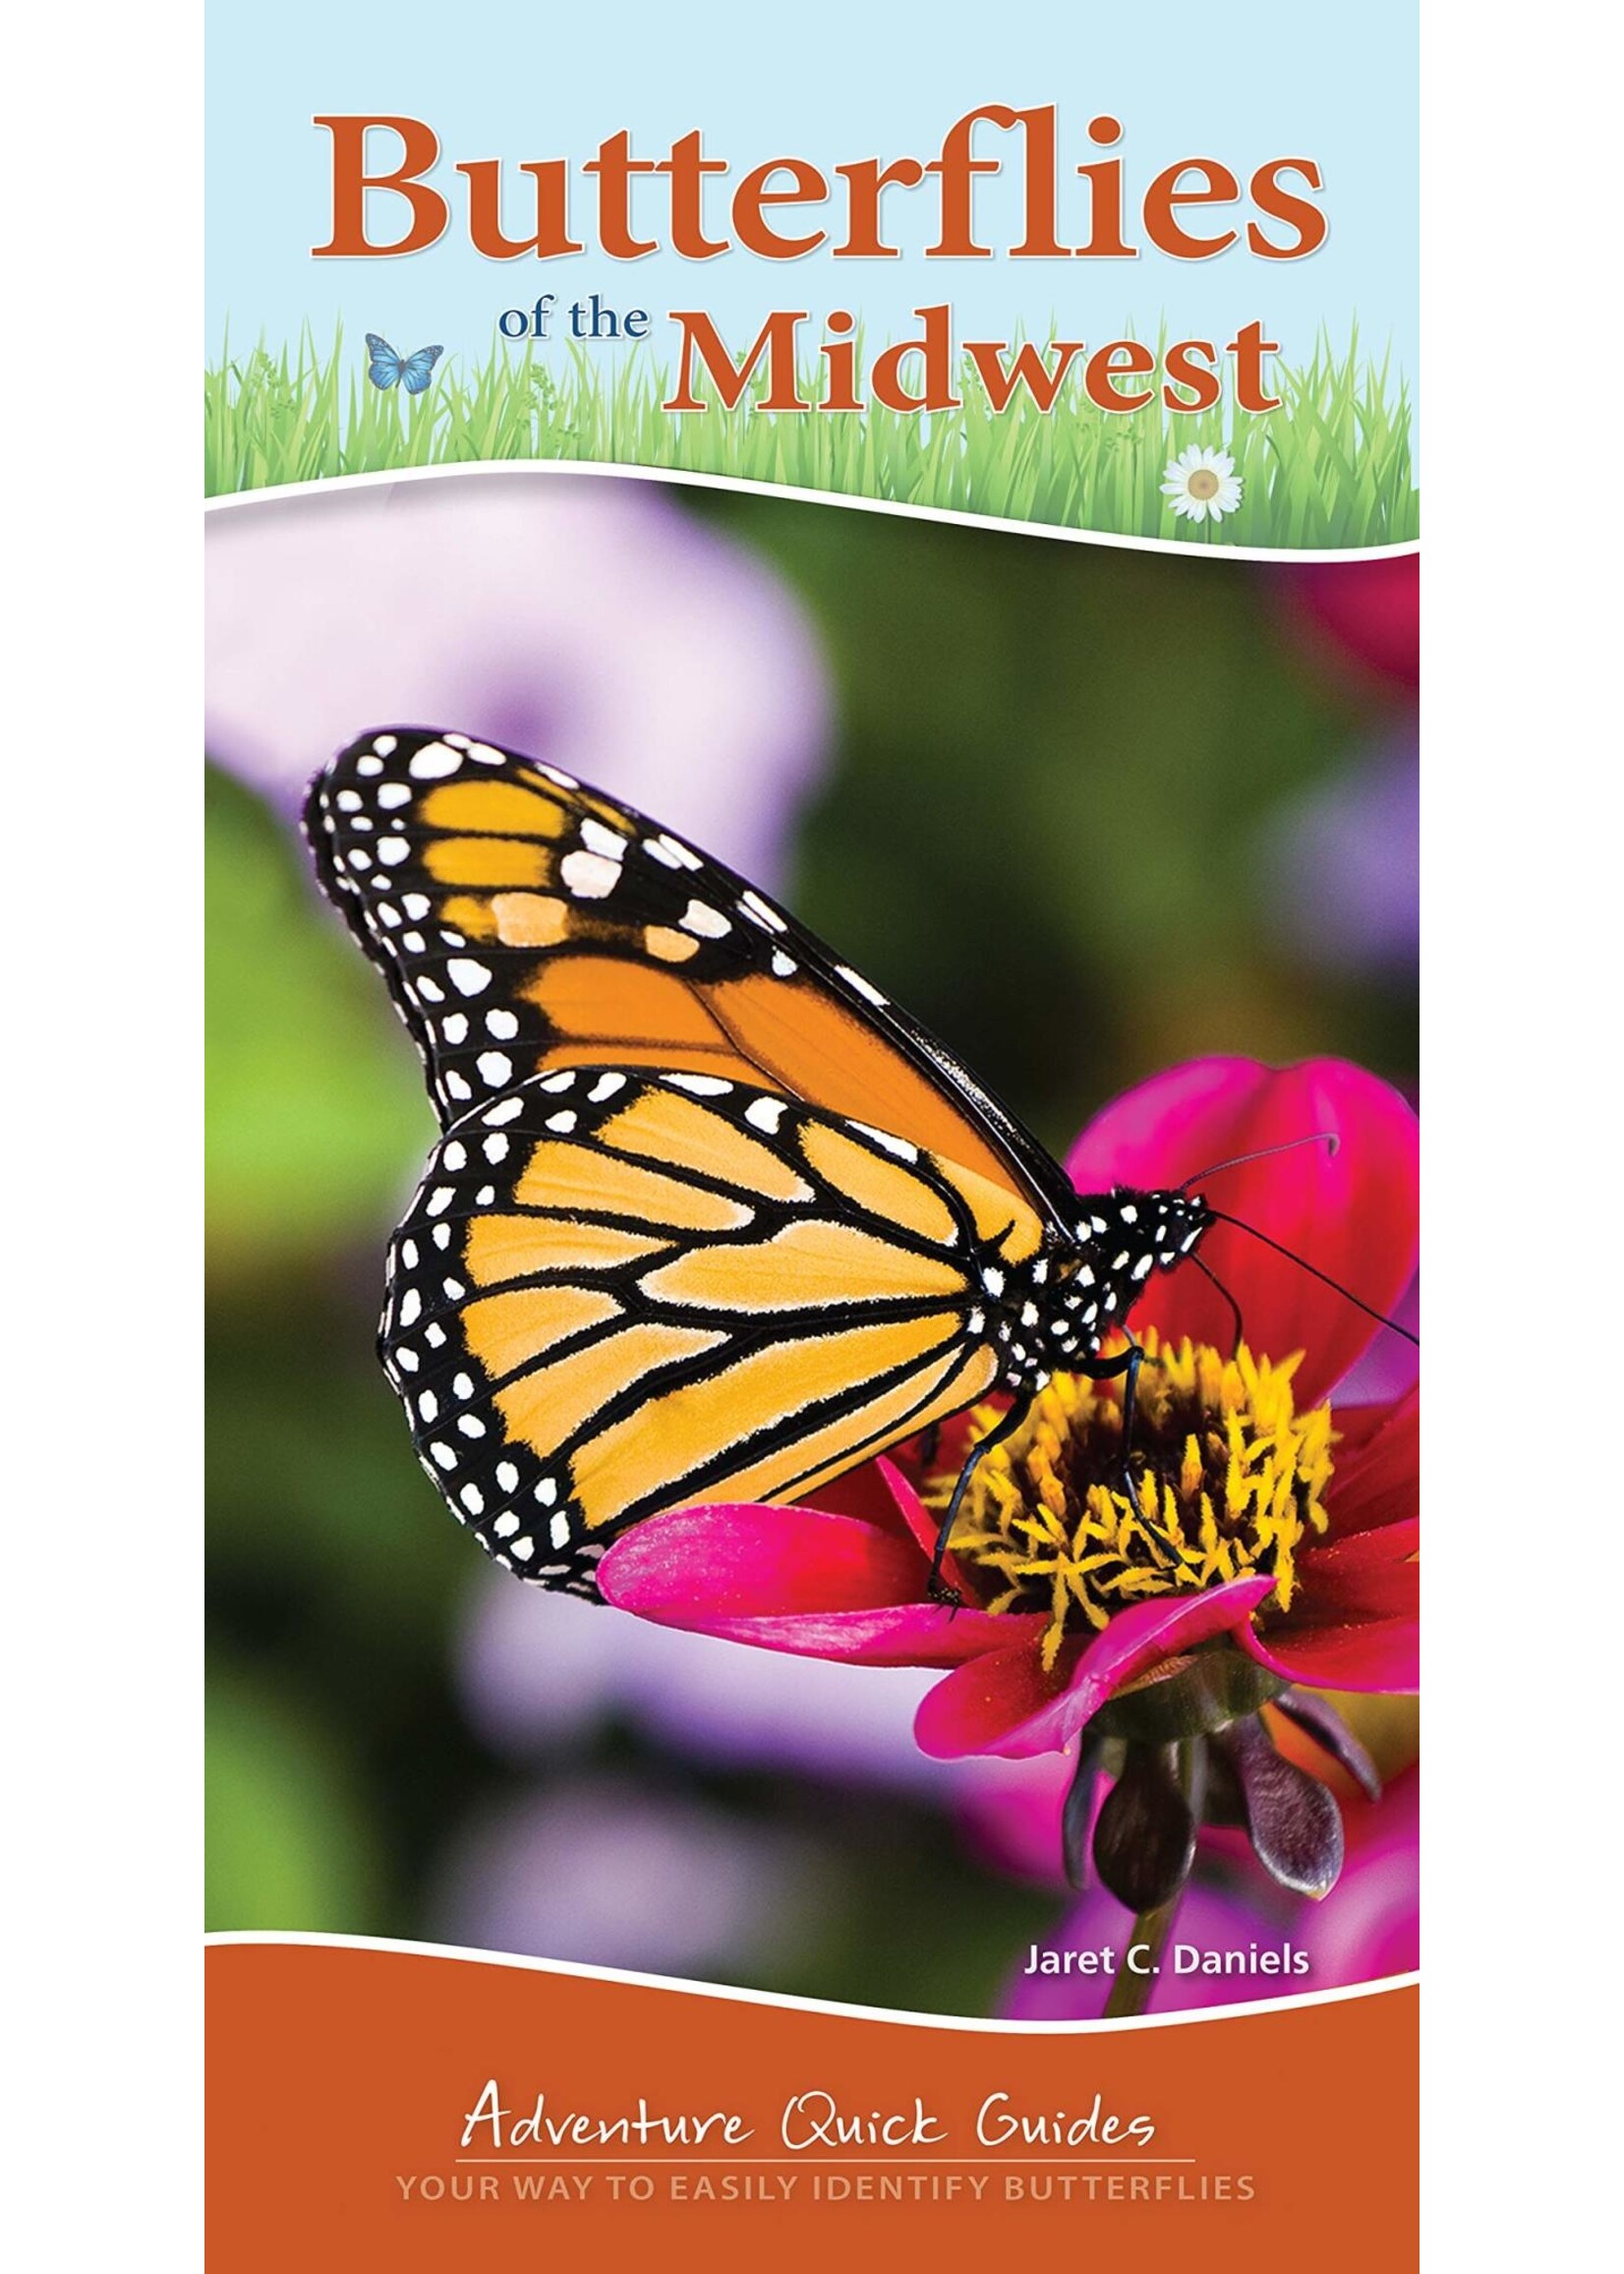 Butterflies of the Midwest: Adventure Quick Guide